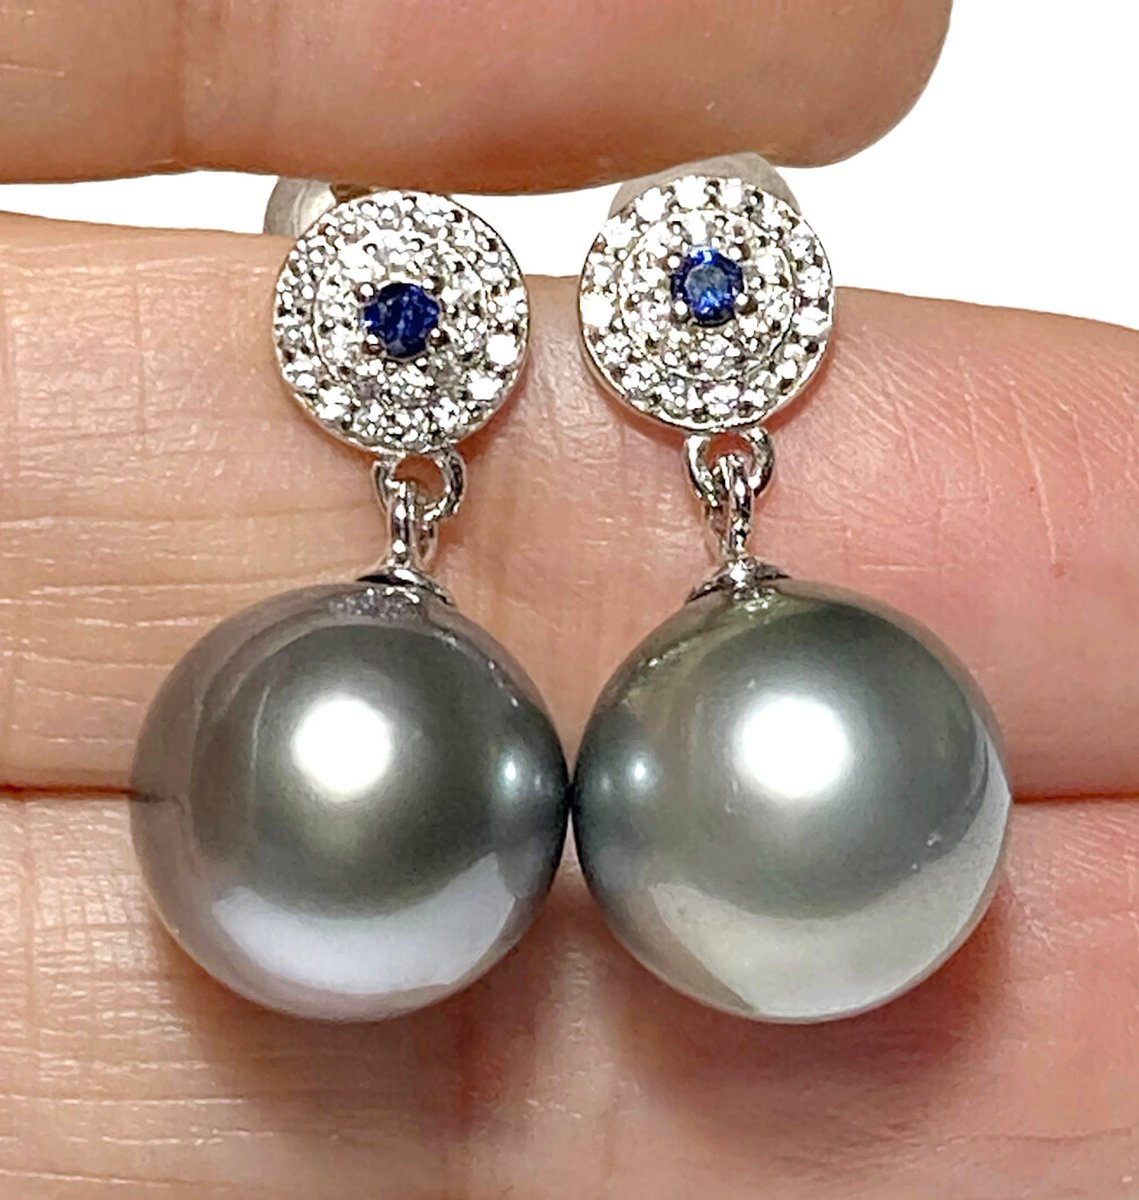 Excited to share the latest addition to my #etsy shop: Best Gift For Her / Premier Tahitian South Sea 11.5mm Natural Peacock Gray Green Overtone Round Cultured Pearl Dangle Earrings https://t.co/HYTl0kotKr #green #valentinesday #yes #pearl #unisexadults #birthday #cart https://t.co/05tVCxk4II